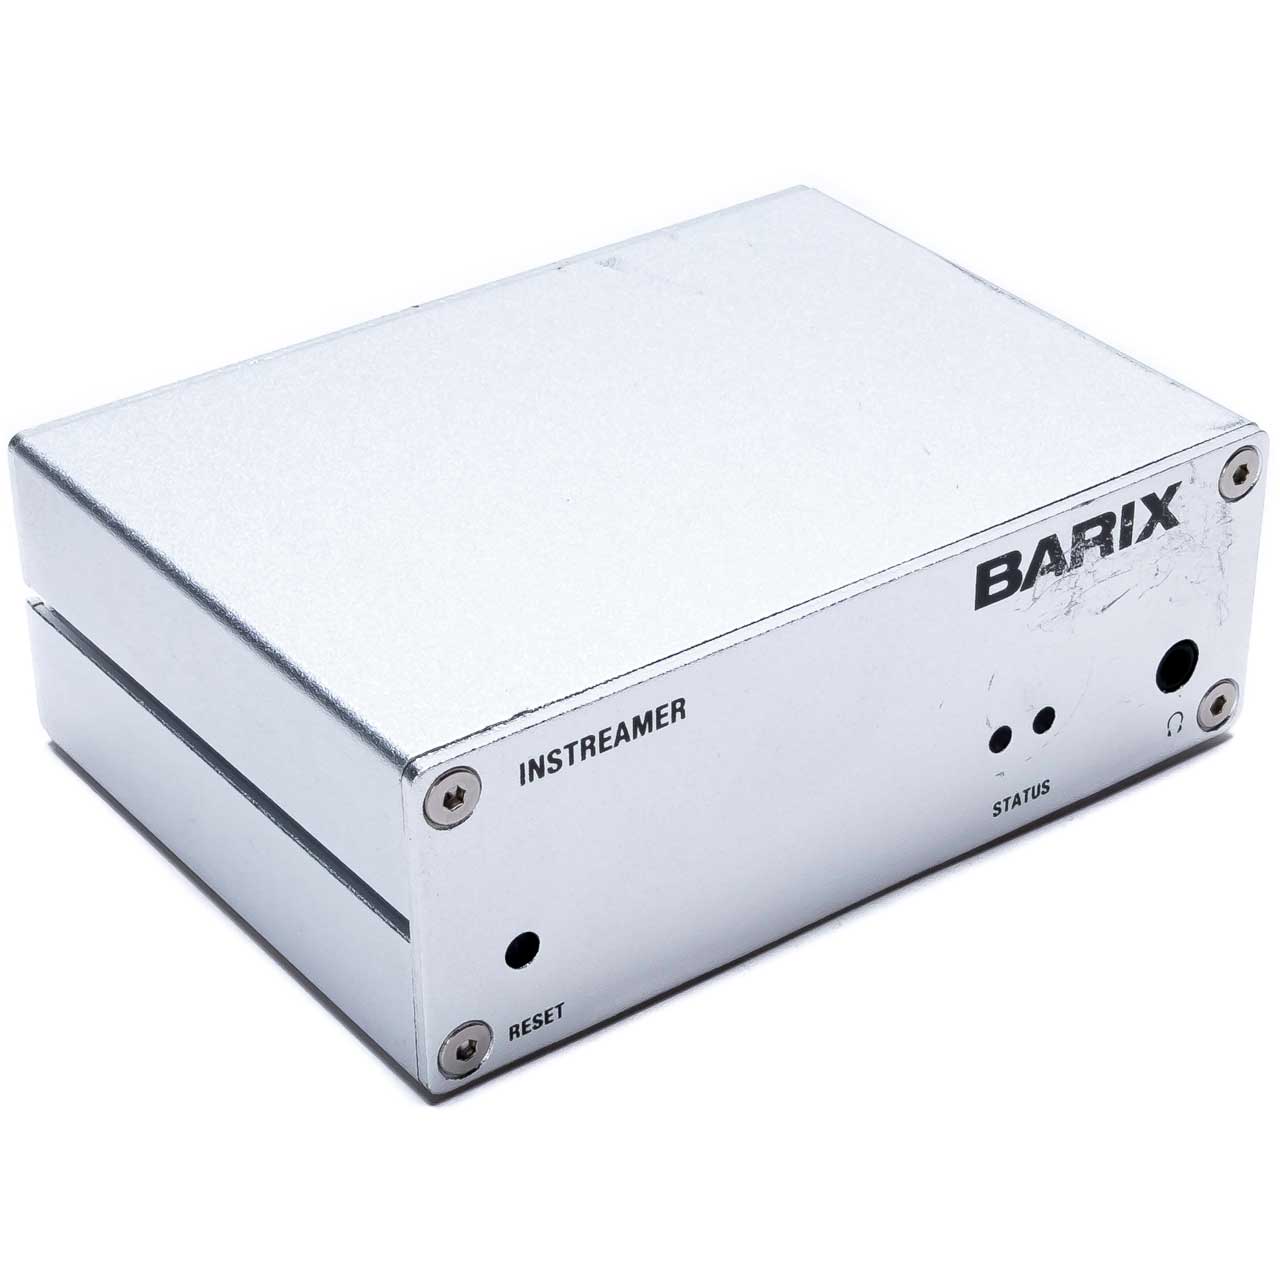 Barix Instreamer Multiprotocol Audio Over IP Encoder - B-Stock Unit - This unit has a Cosmetic Blemish 2012.9123